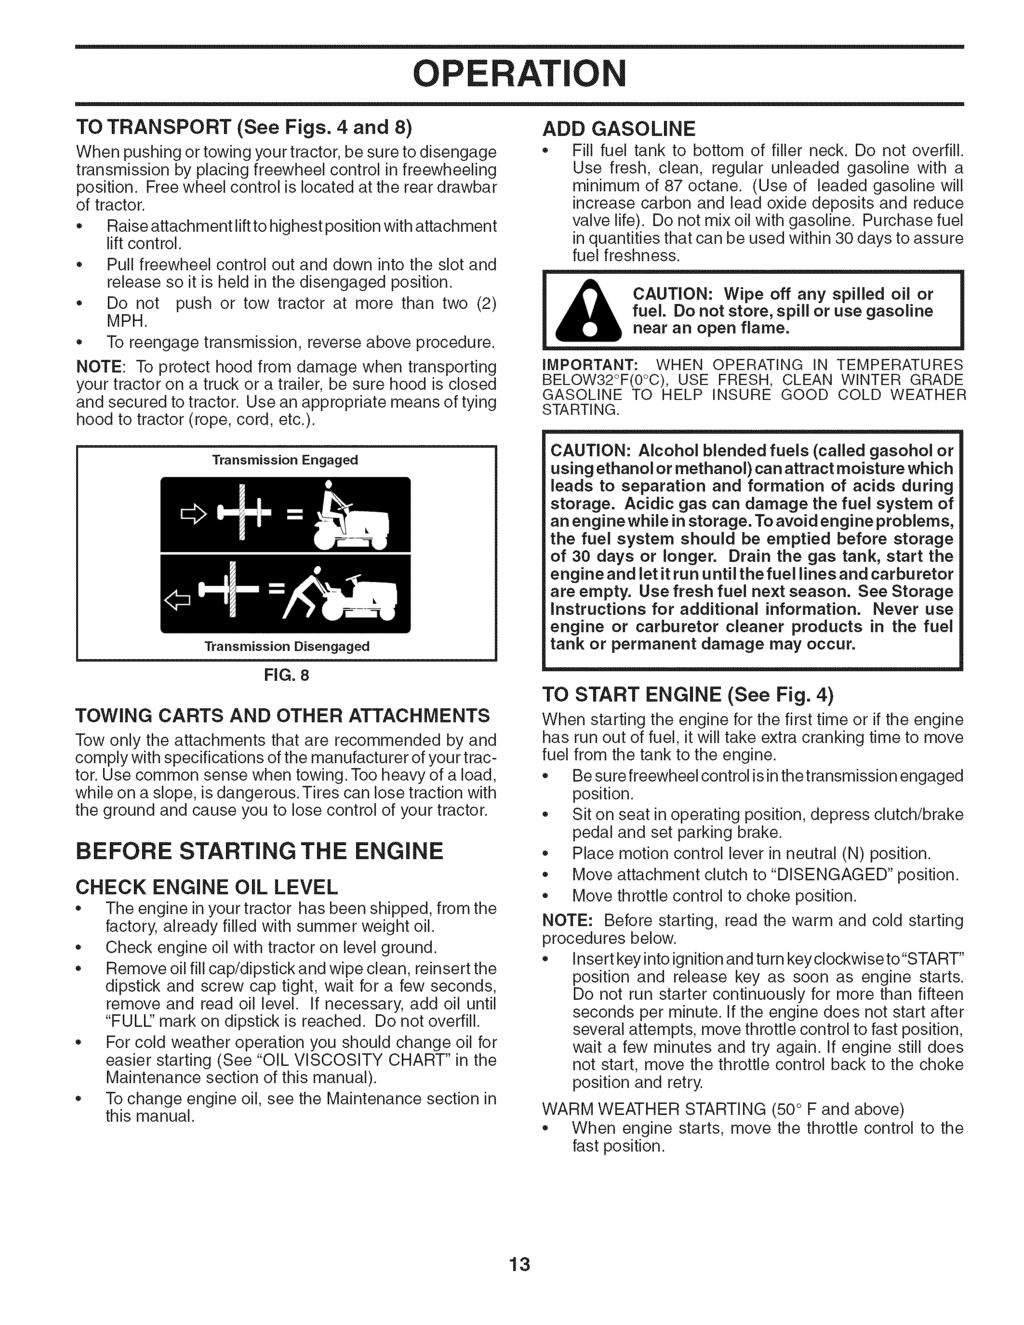 OPERATION TO TRANSPORT (See Figs. 4 and 8) When pushing or towing your tractor, be sure to disengage transmission by placing freewheel control in freewheeling position.